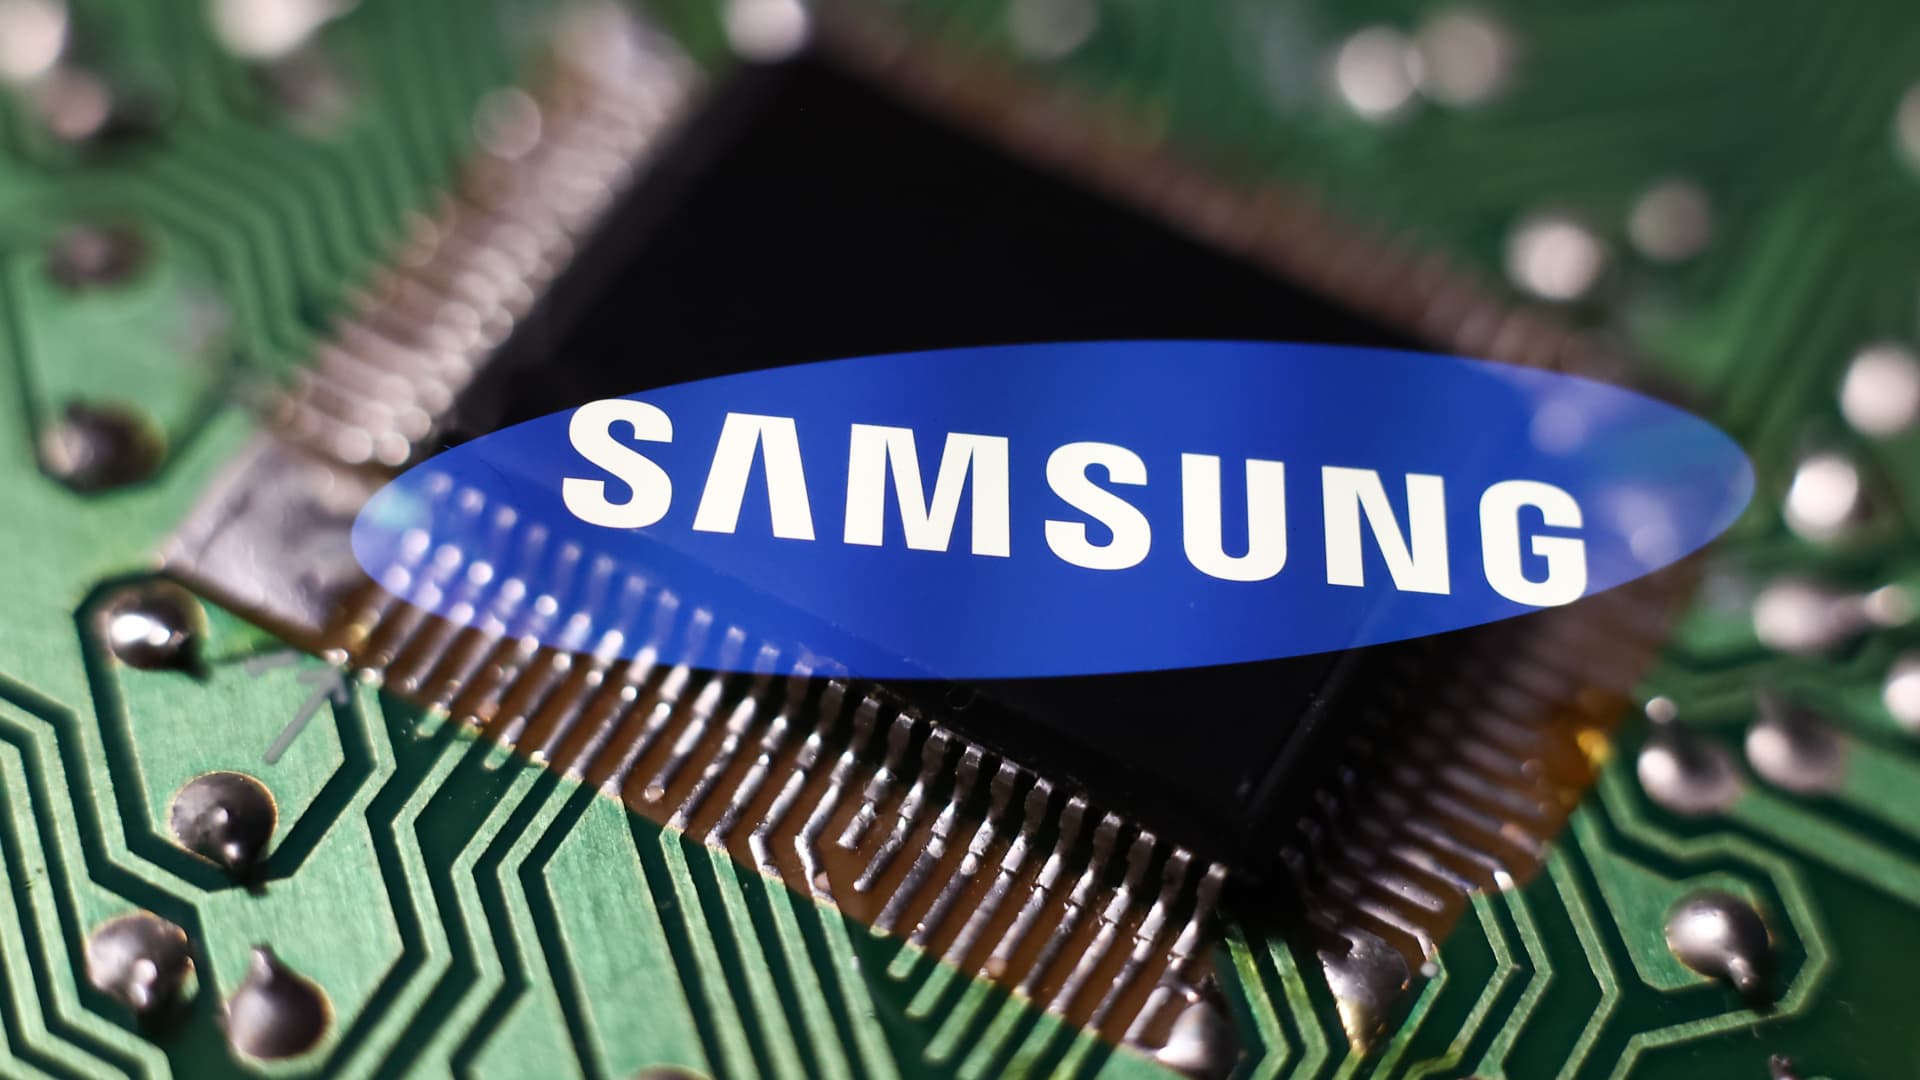 Samsung faces weakest quarter since 2009 as memory chip market in ‘worst slump in decades’